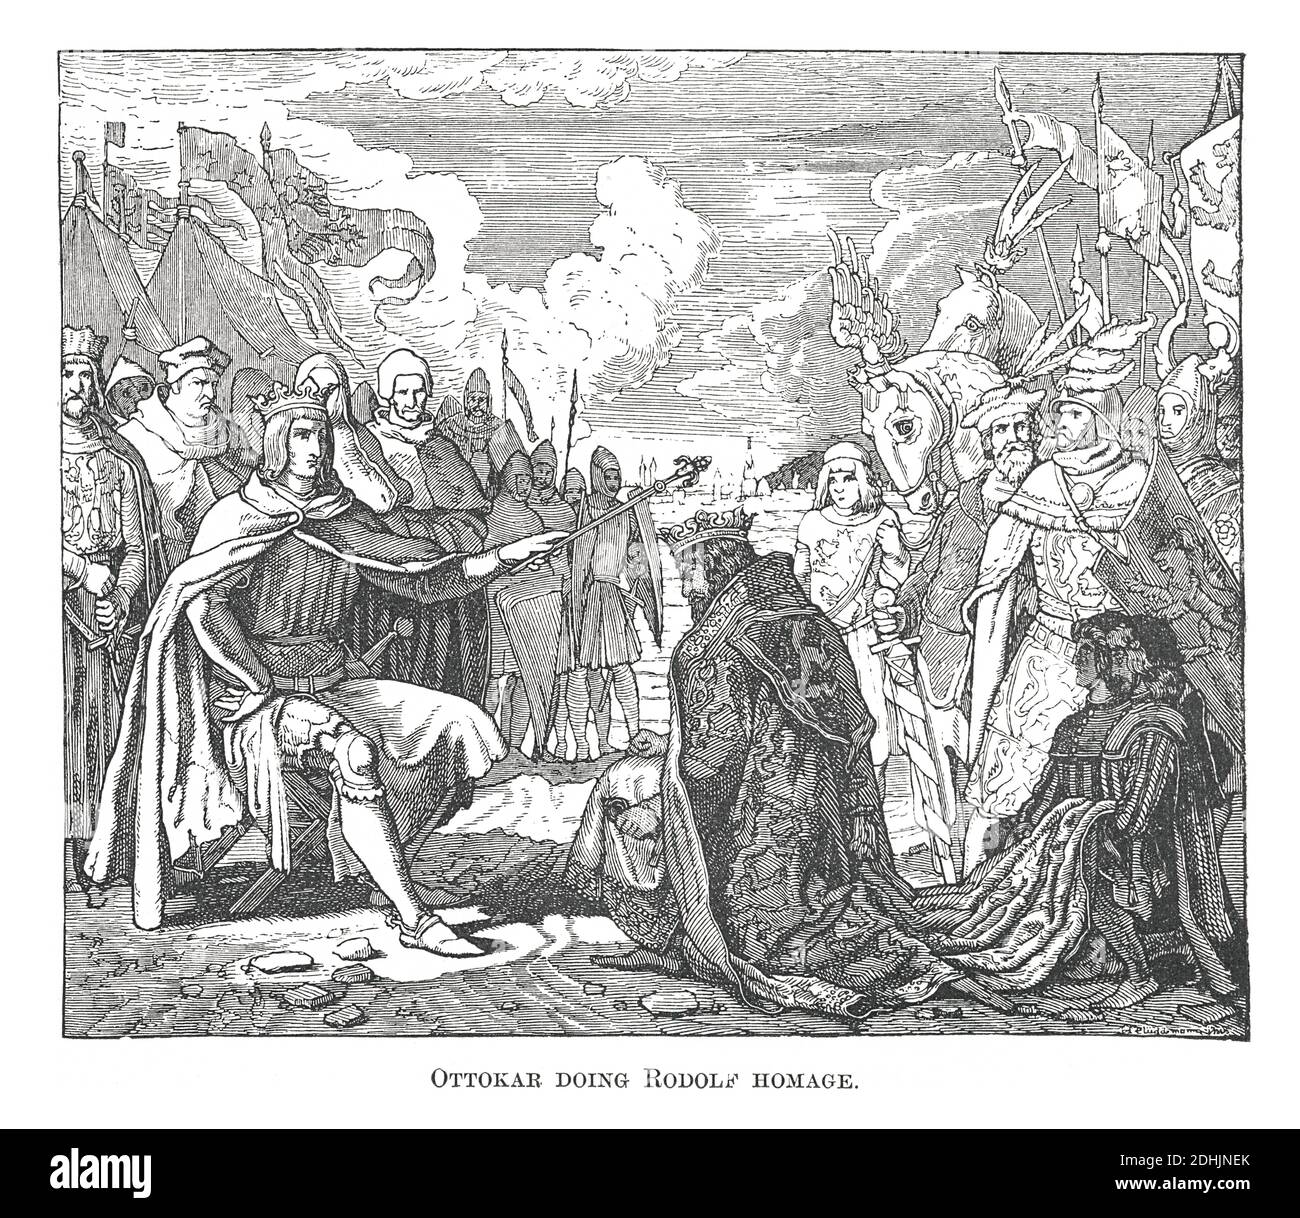 19th-century illustration of Ottokar II of Bohemia doing Rodolf I of Germany Homage (antique engraving). Original artwork published in 'A pictorial hi Stock Photo